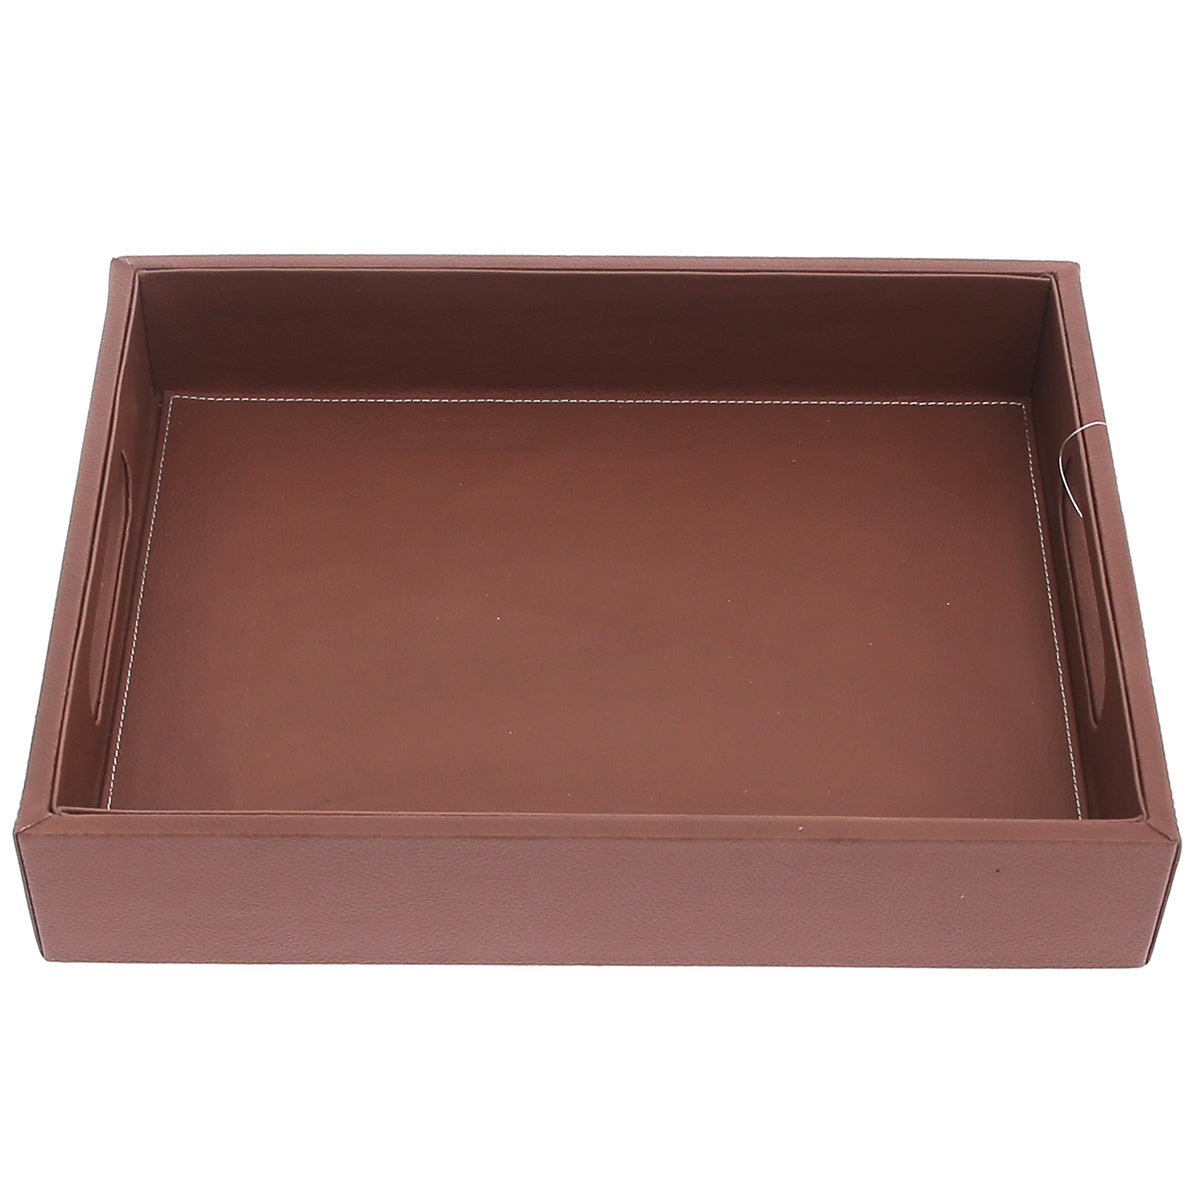 Leatherette Tray Brown M